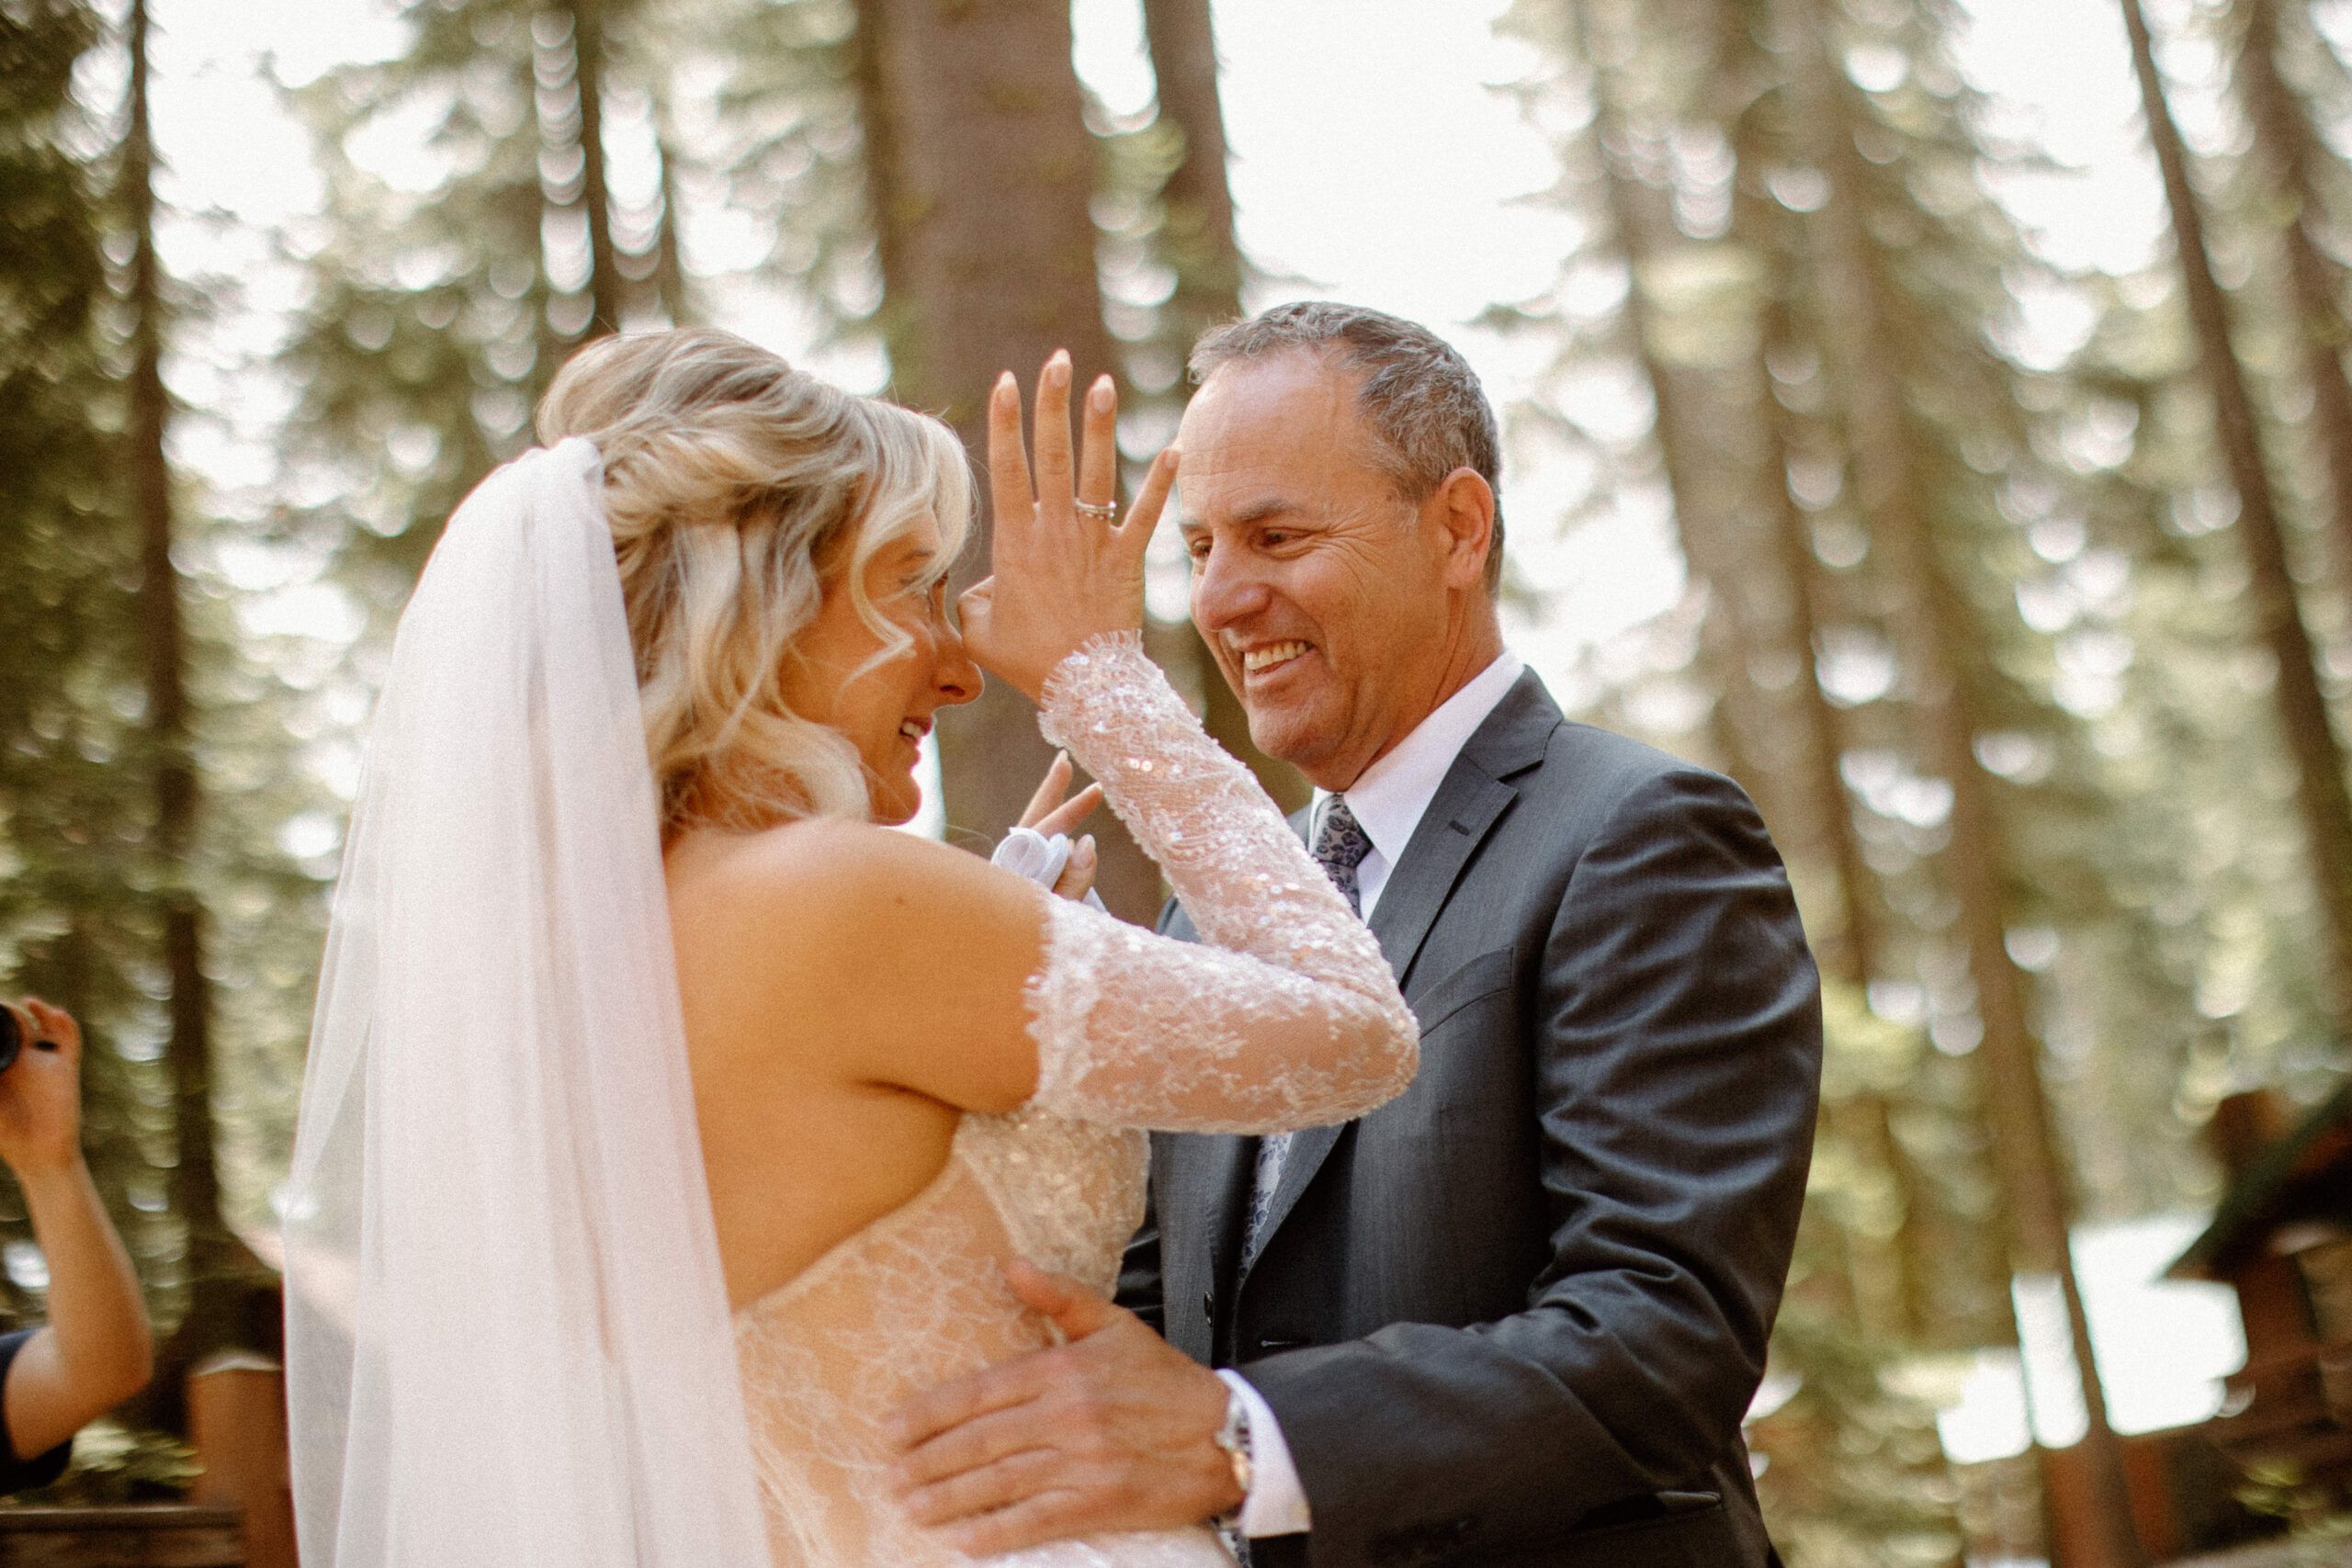 stunning bride poses with her dad before her dreamy wedding day